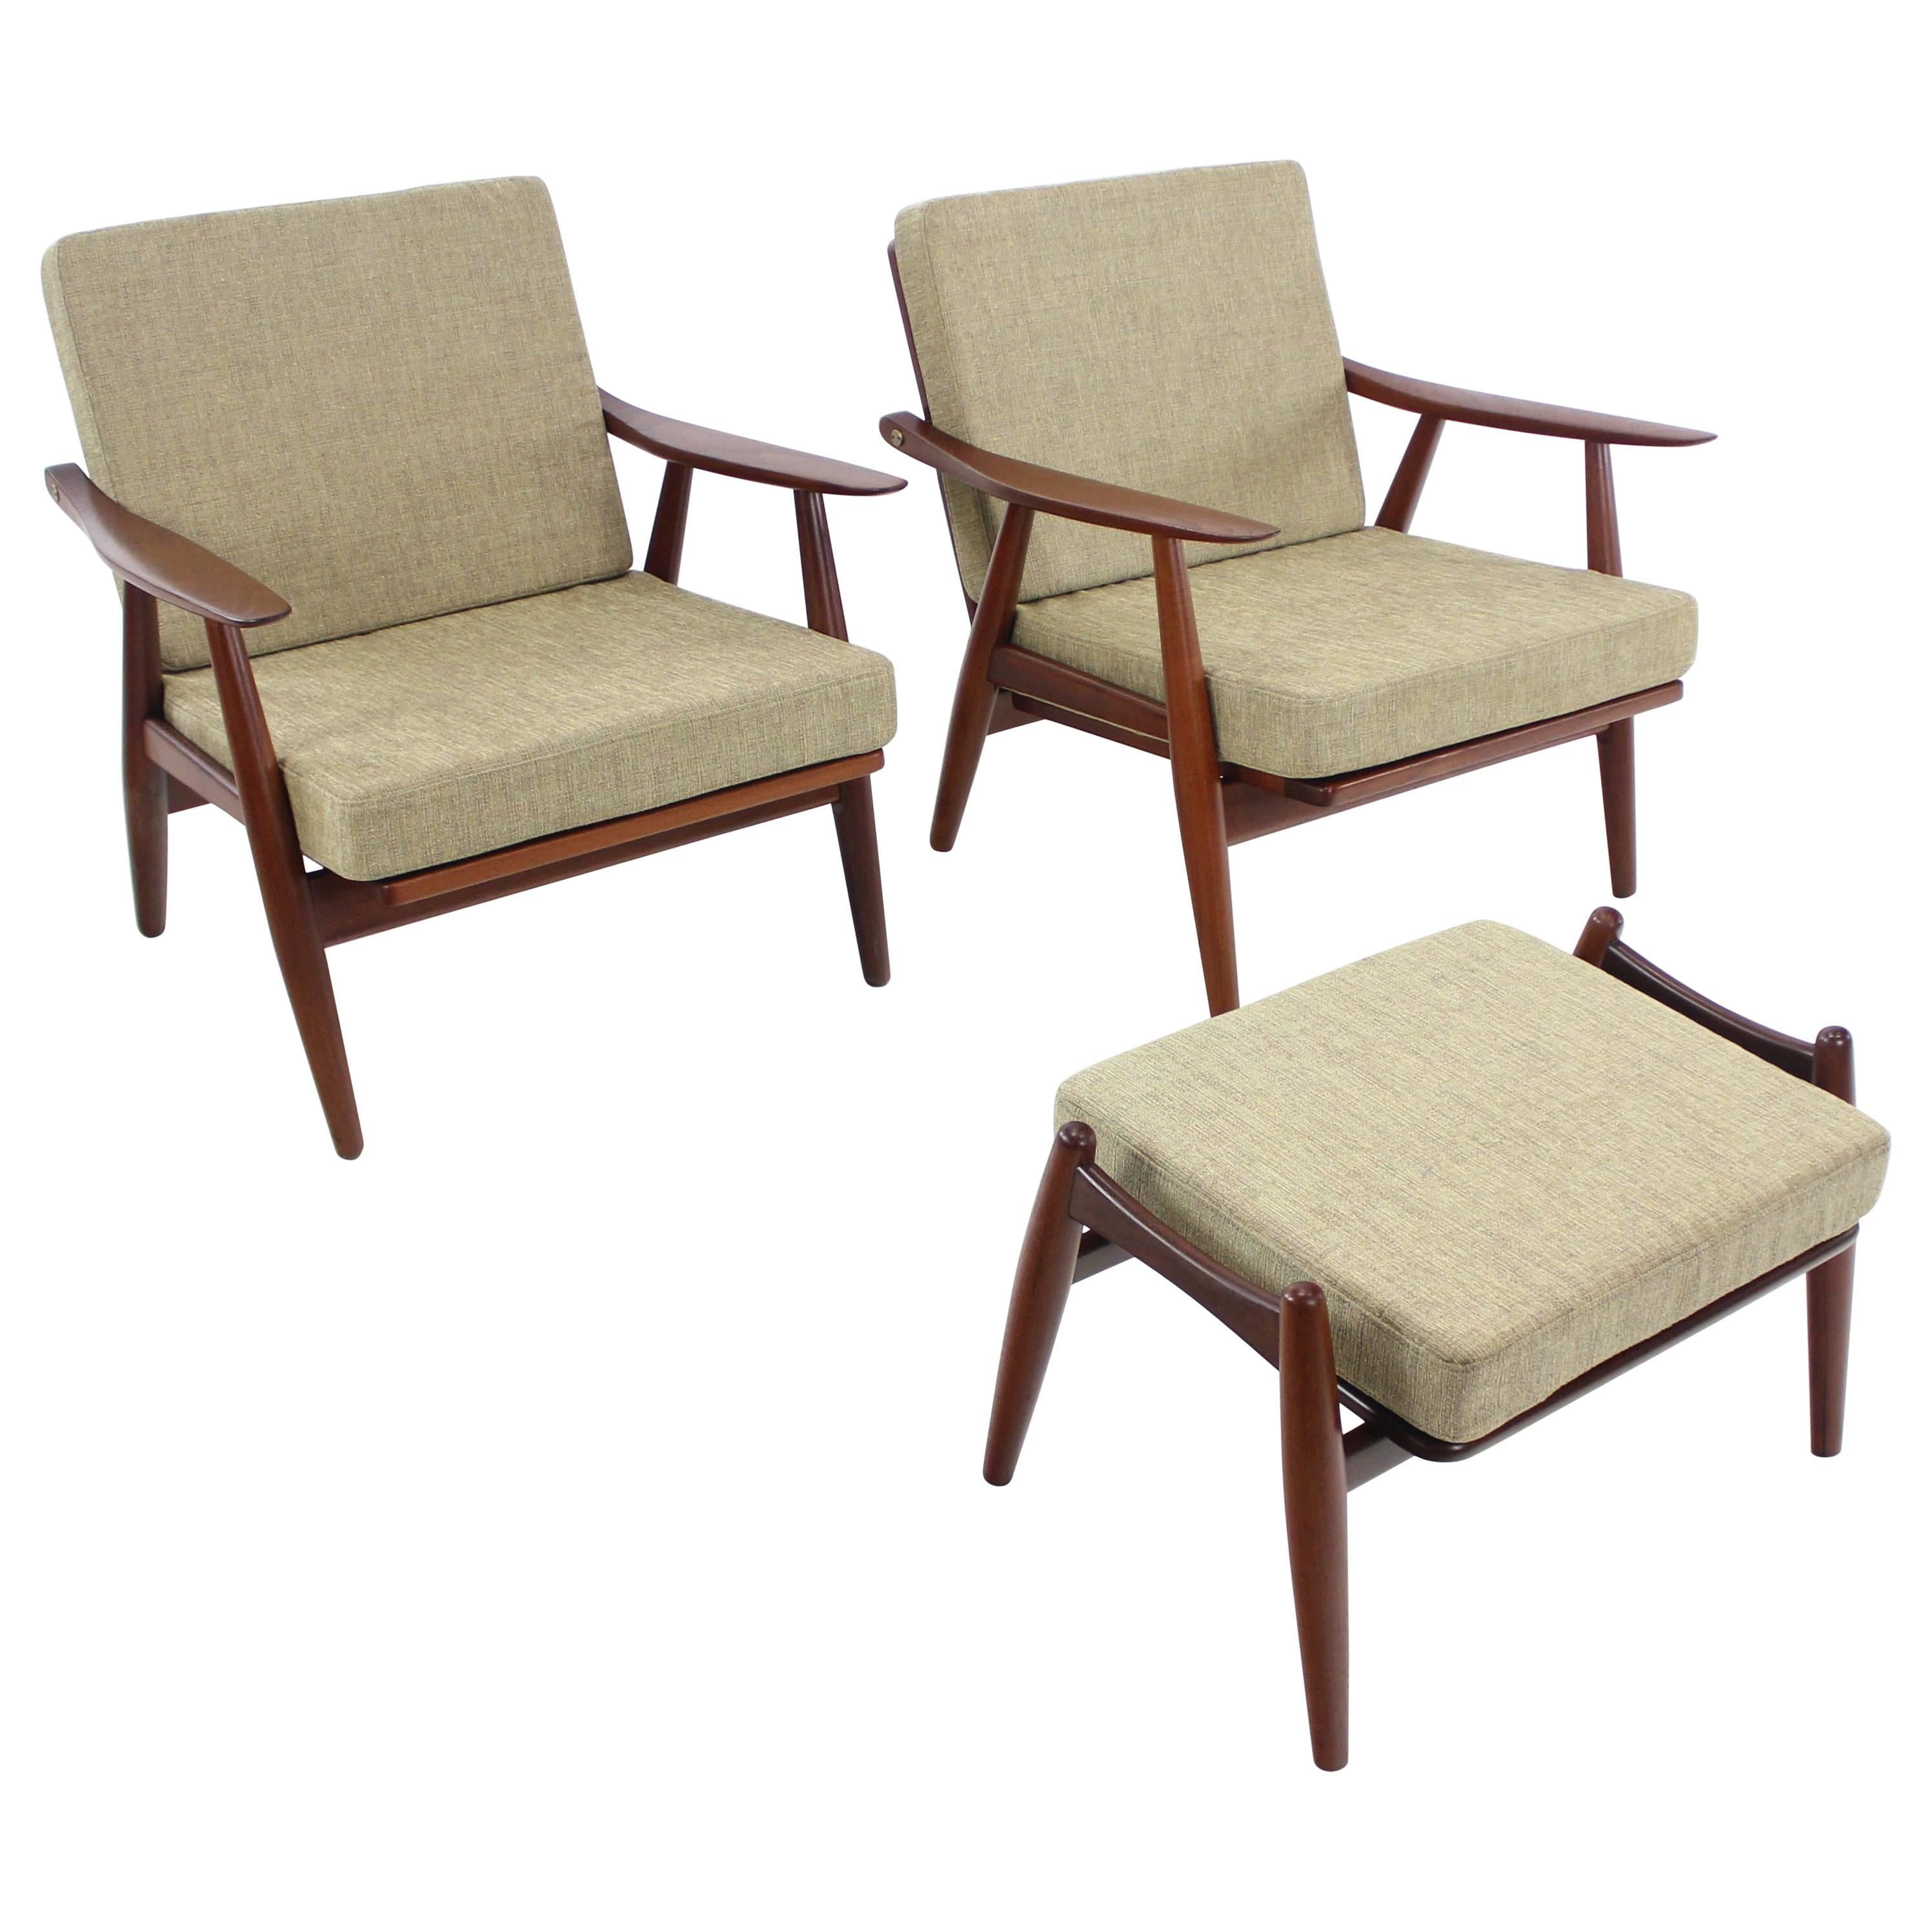 Rare Pair of Danish Modern Armchairs and Ottoman Designed by Hans Wegner For Sale